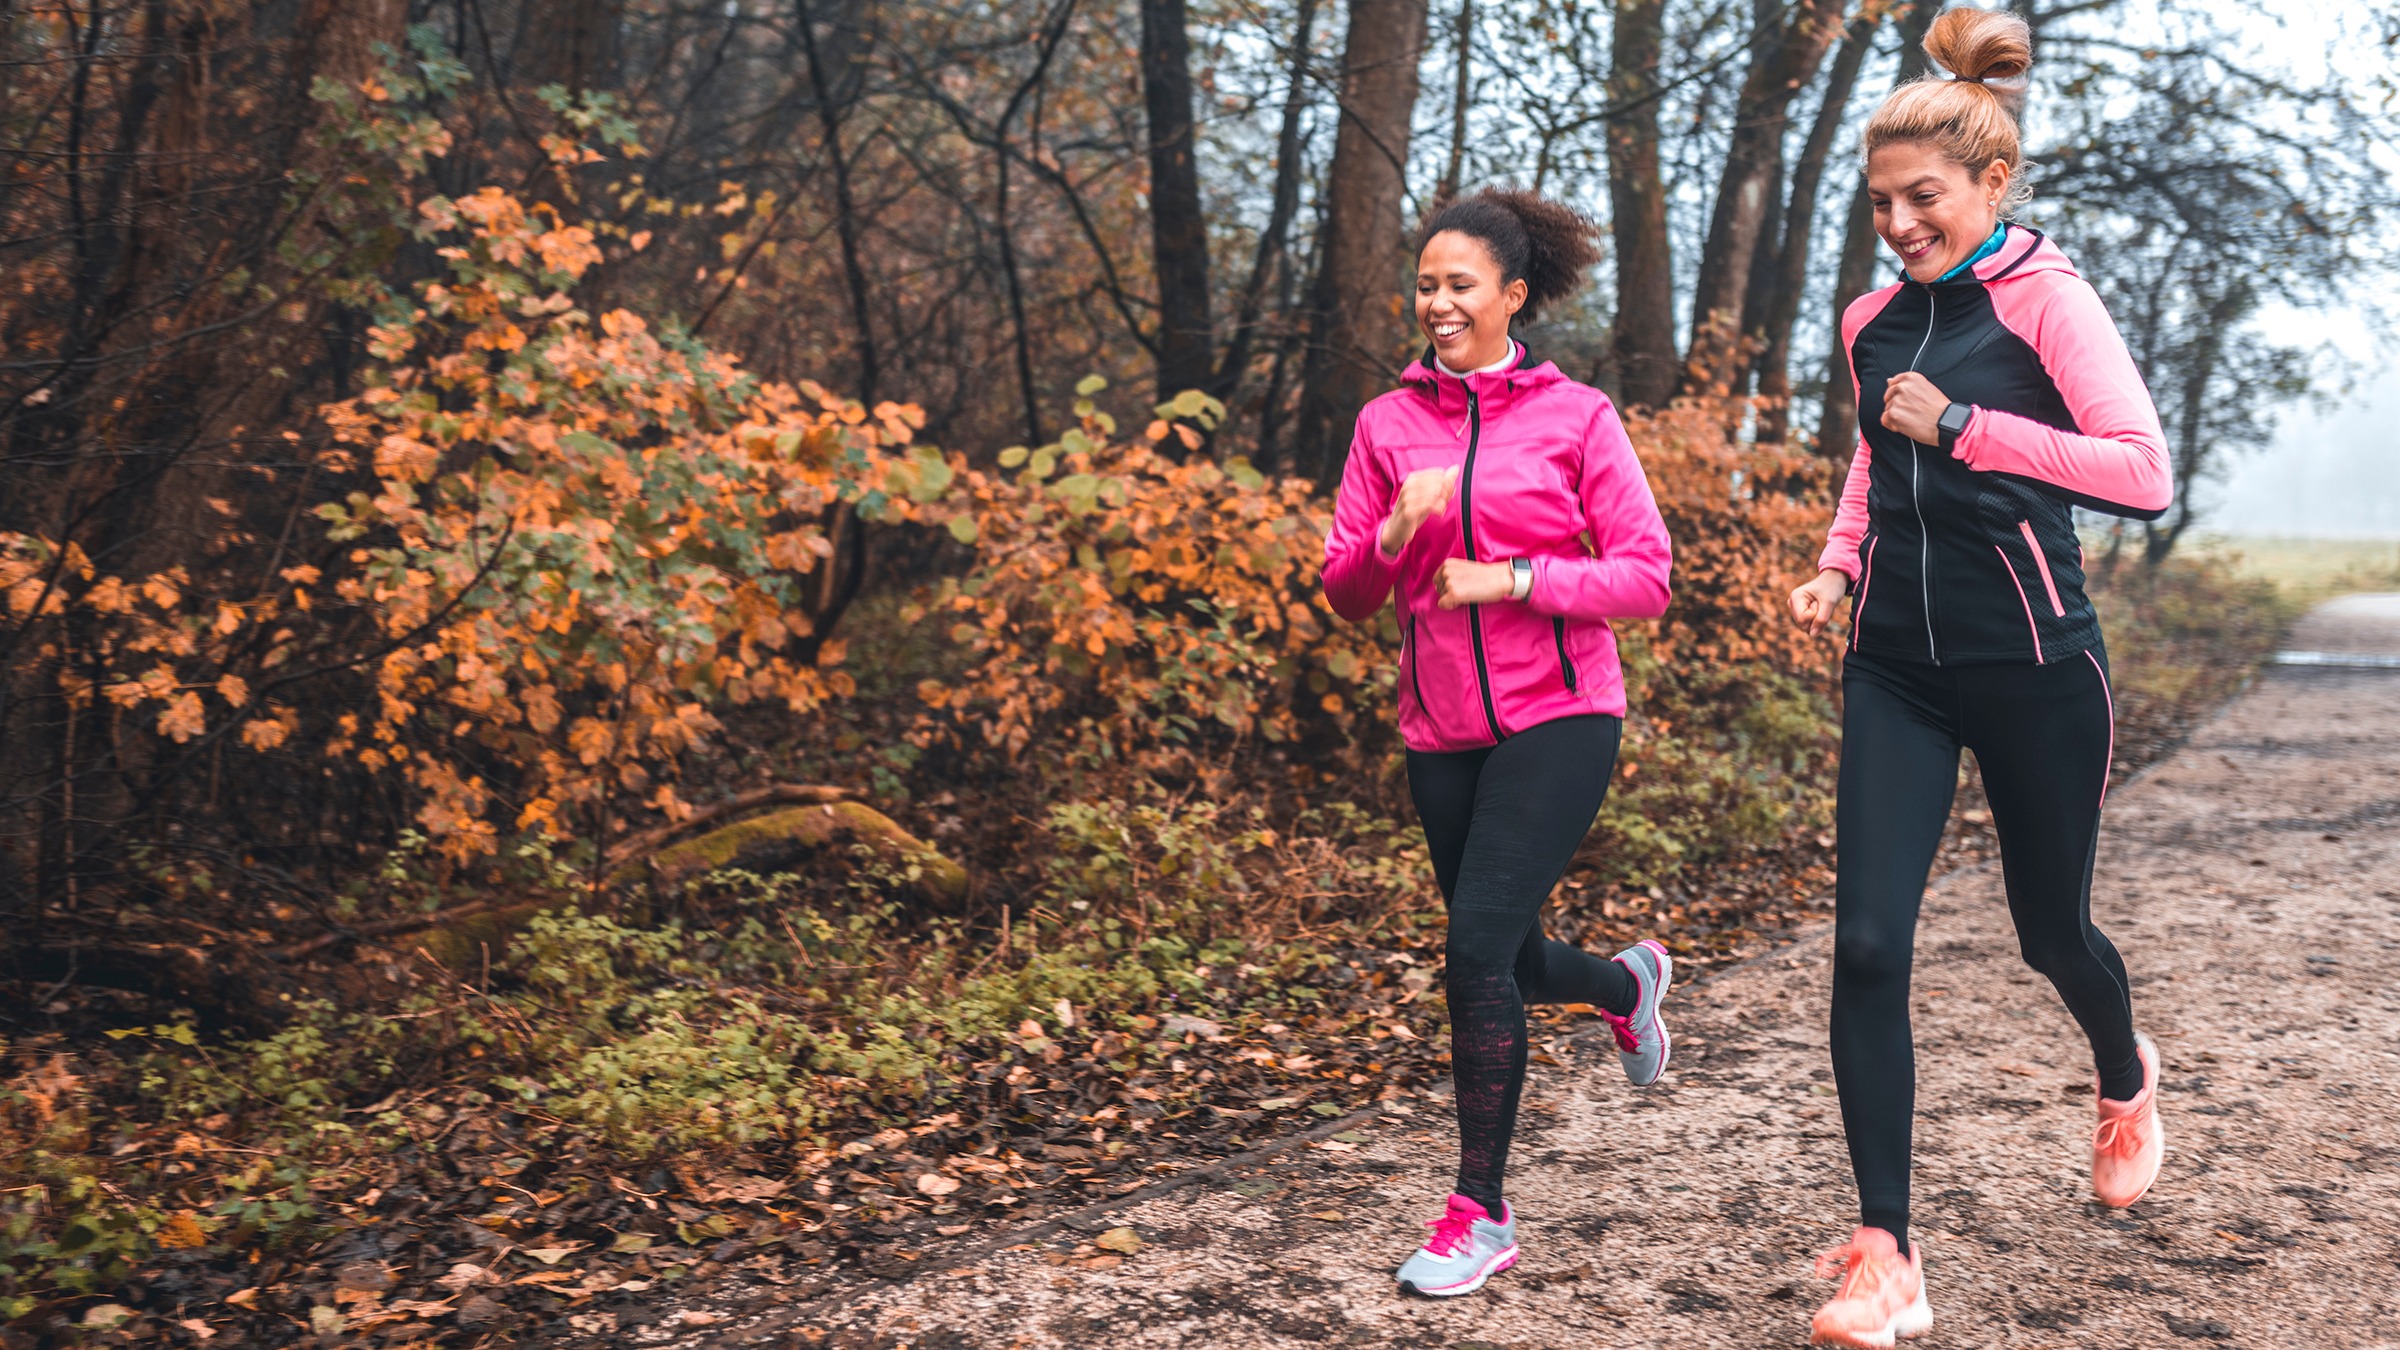 Two women running on a fall day on a park path. They are both wearing pink and black running gear and smiling.
AzmanL/E+ via Getty Images